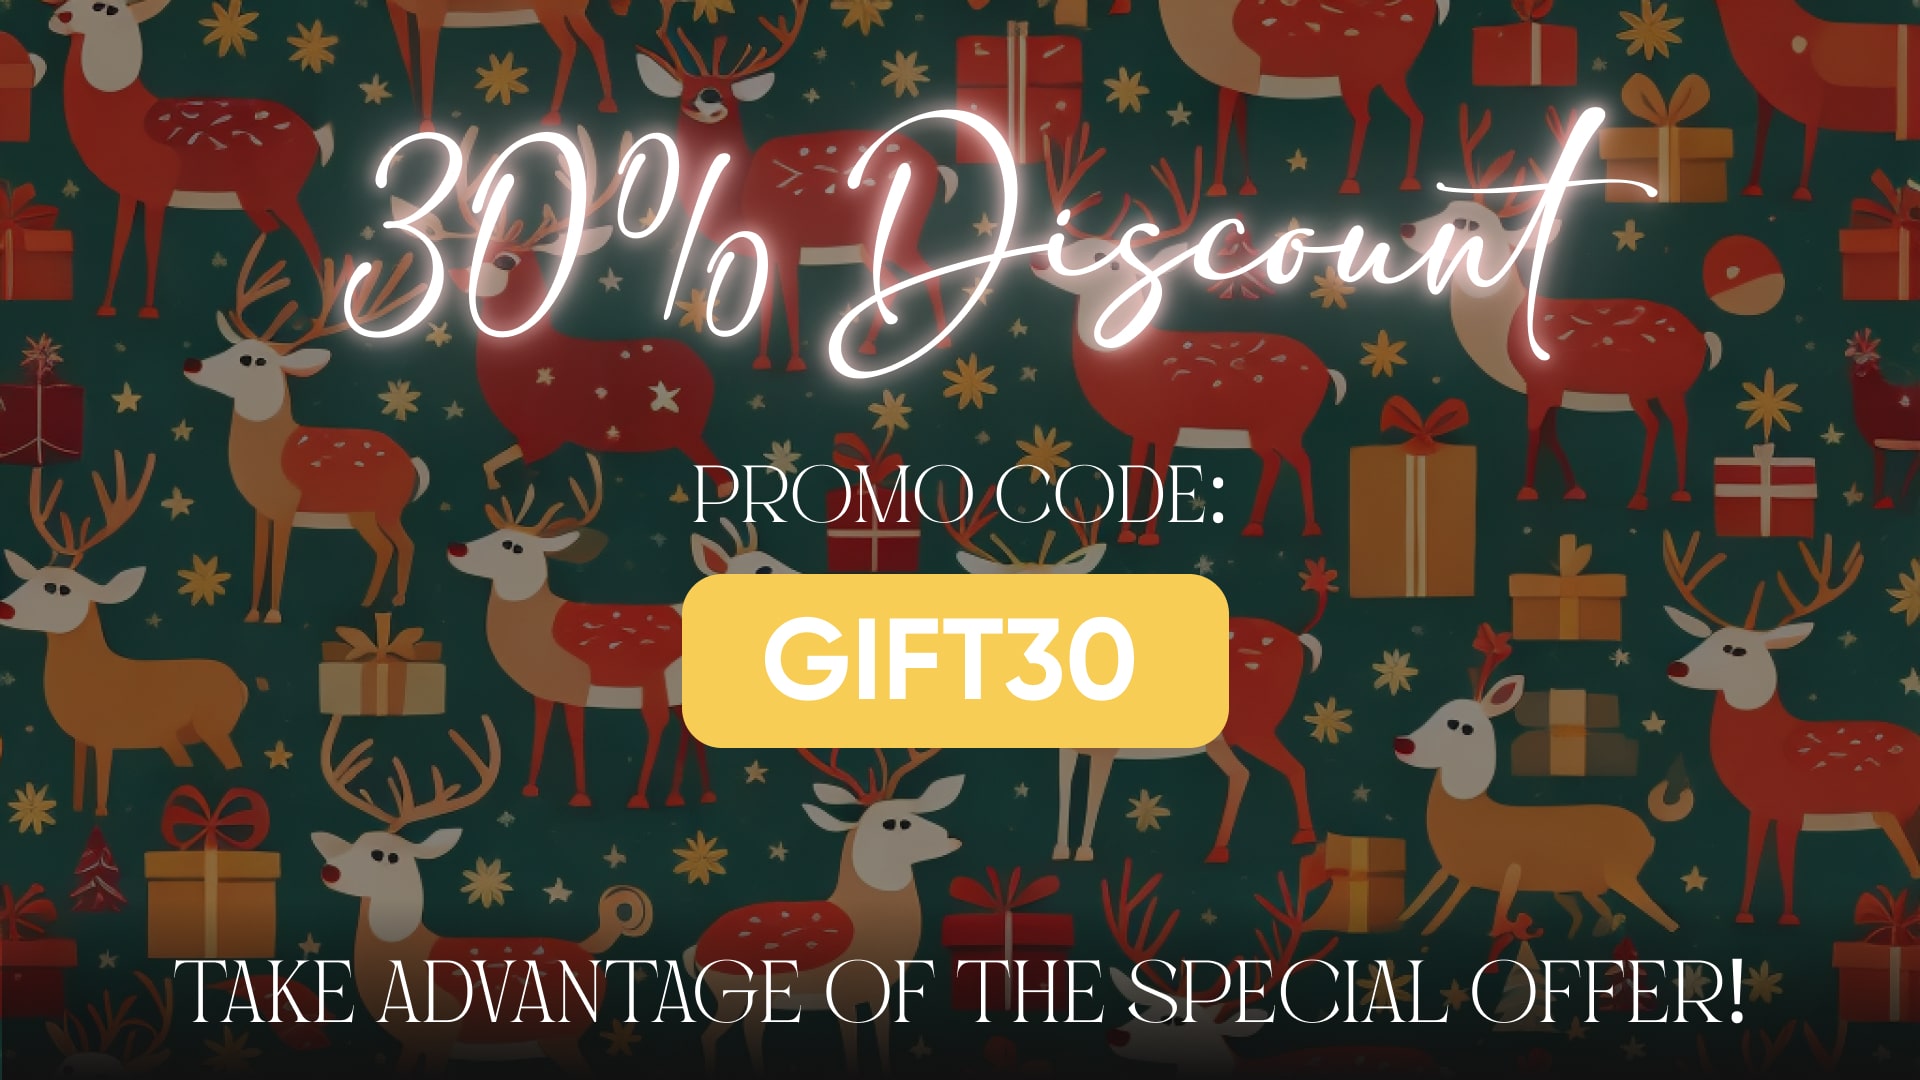 Design a banner showcasing the exclusive 30% discount with the promo code 'GIFT30'.